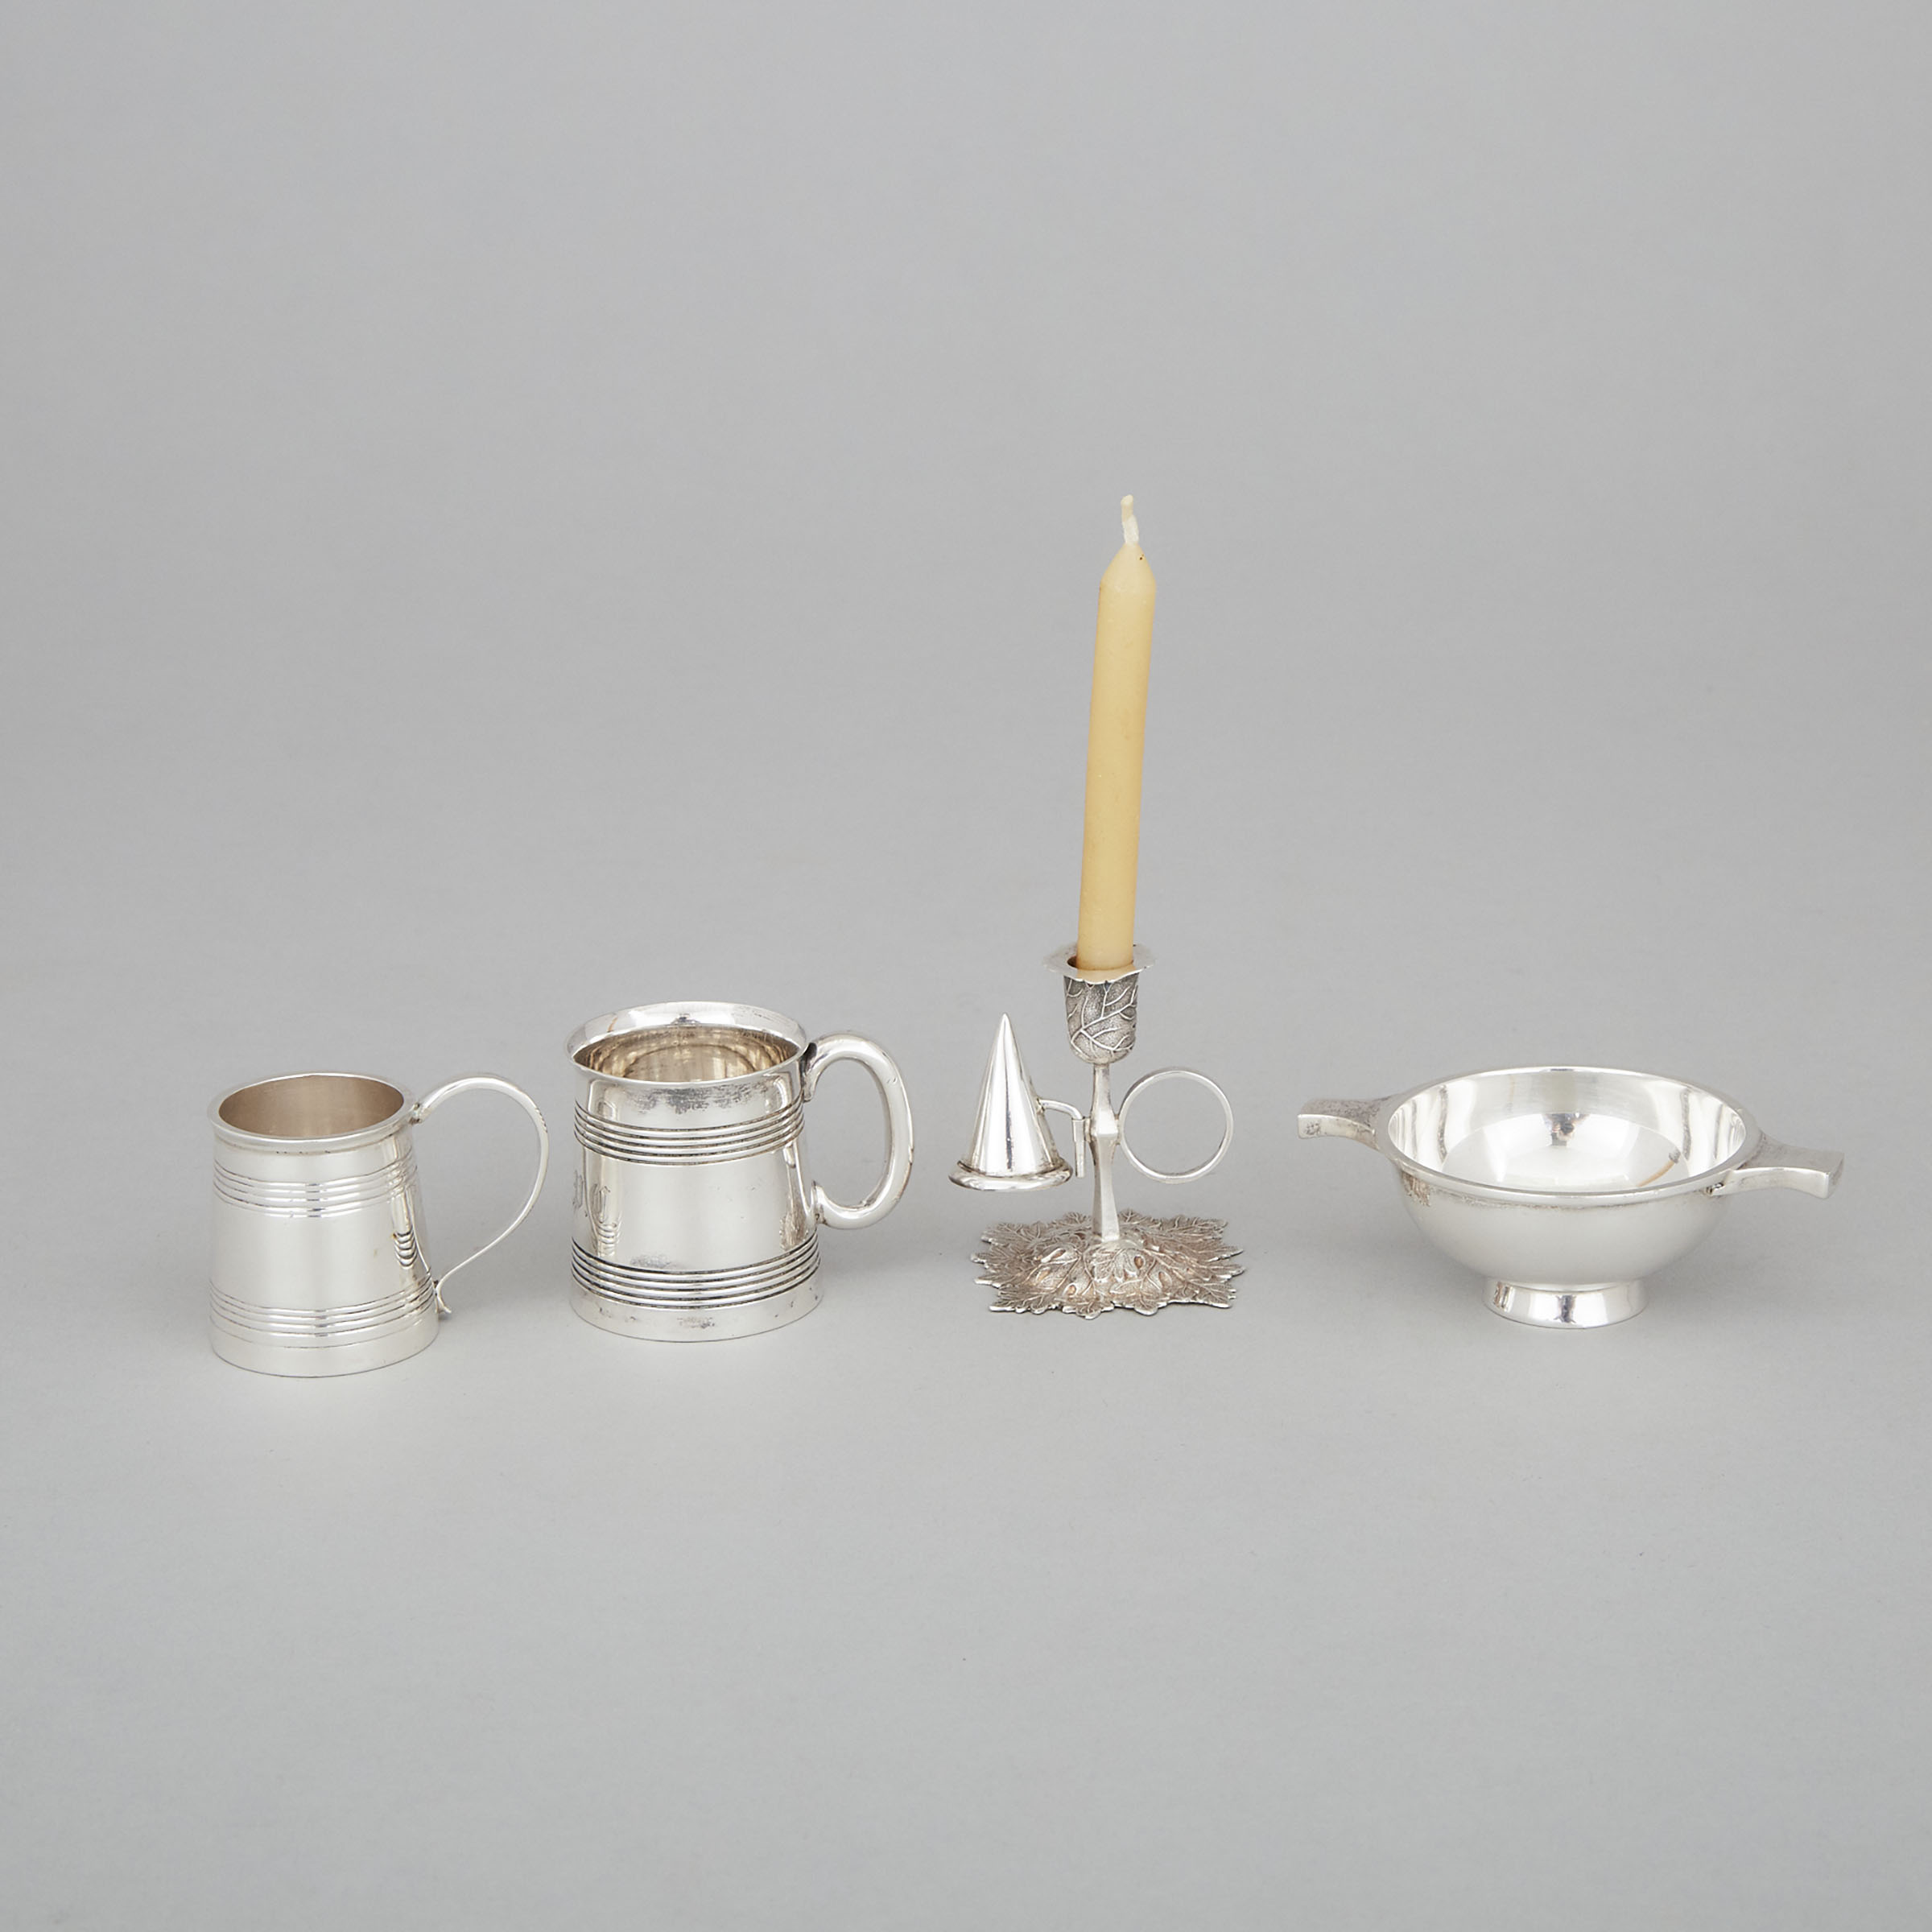 Victorian Silver Miniature Chamberstick, Yapp & Woodward, Birmingham, 1855, Two Miniature Mugs, Job Frank Hall, London, 1894 and William Aitken, Chester, 1900, and a Scottish Small Quaich, Hamilton & Inches, 1950